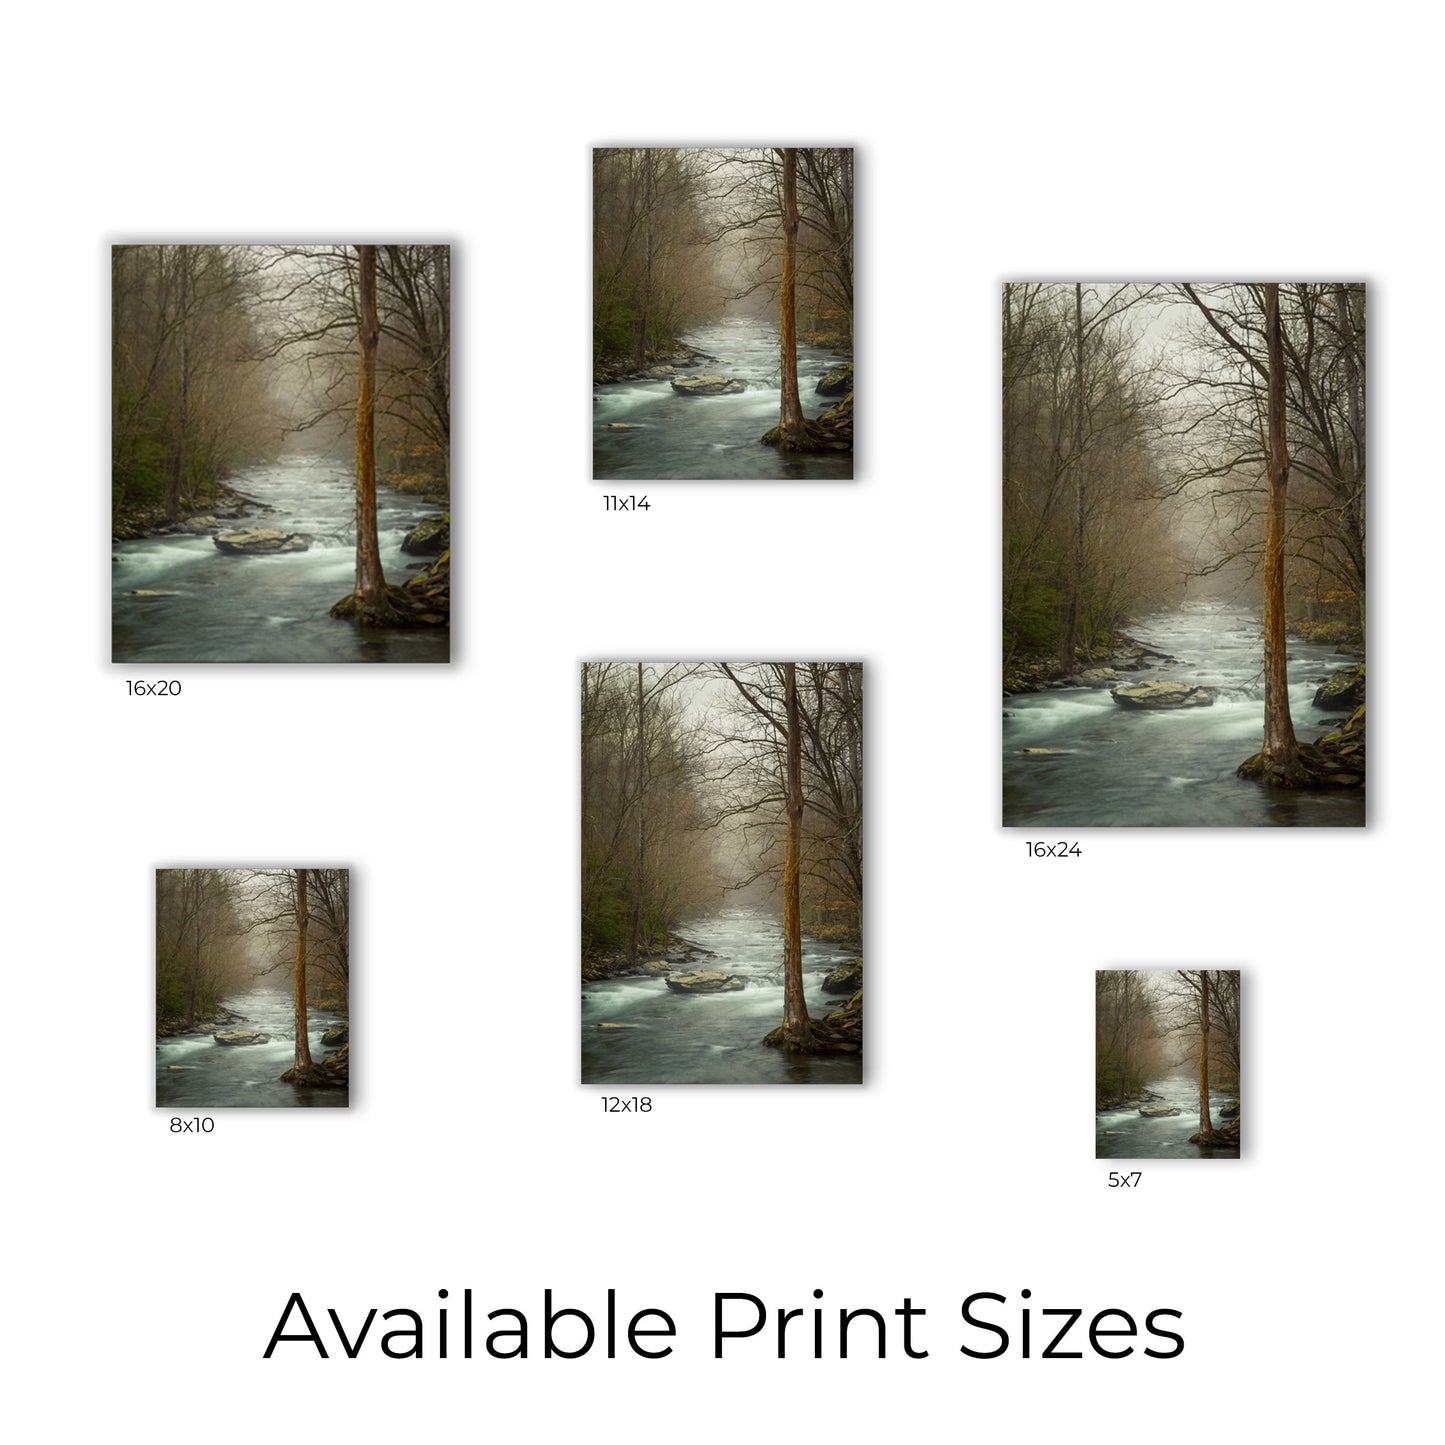 Visual representation of wall art print sizes available: 5x7, 8x10, 11x14, 12x18, 16x20, and 16x24.